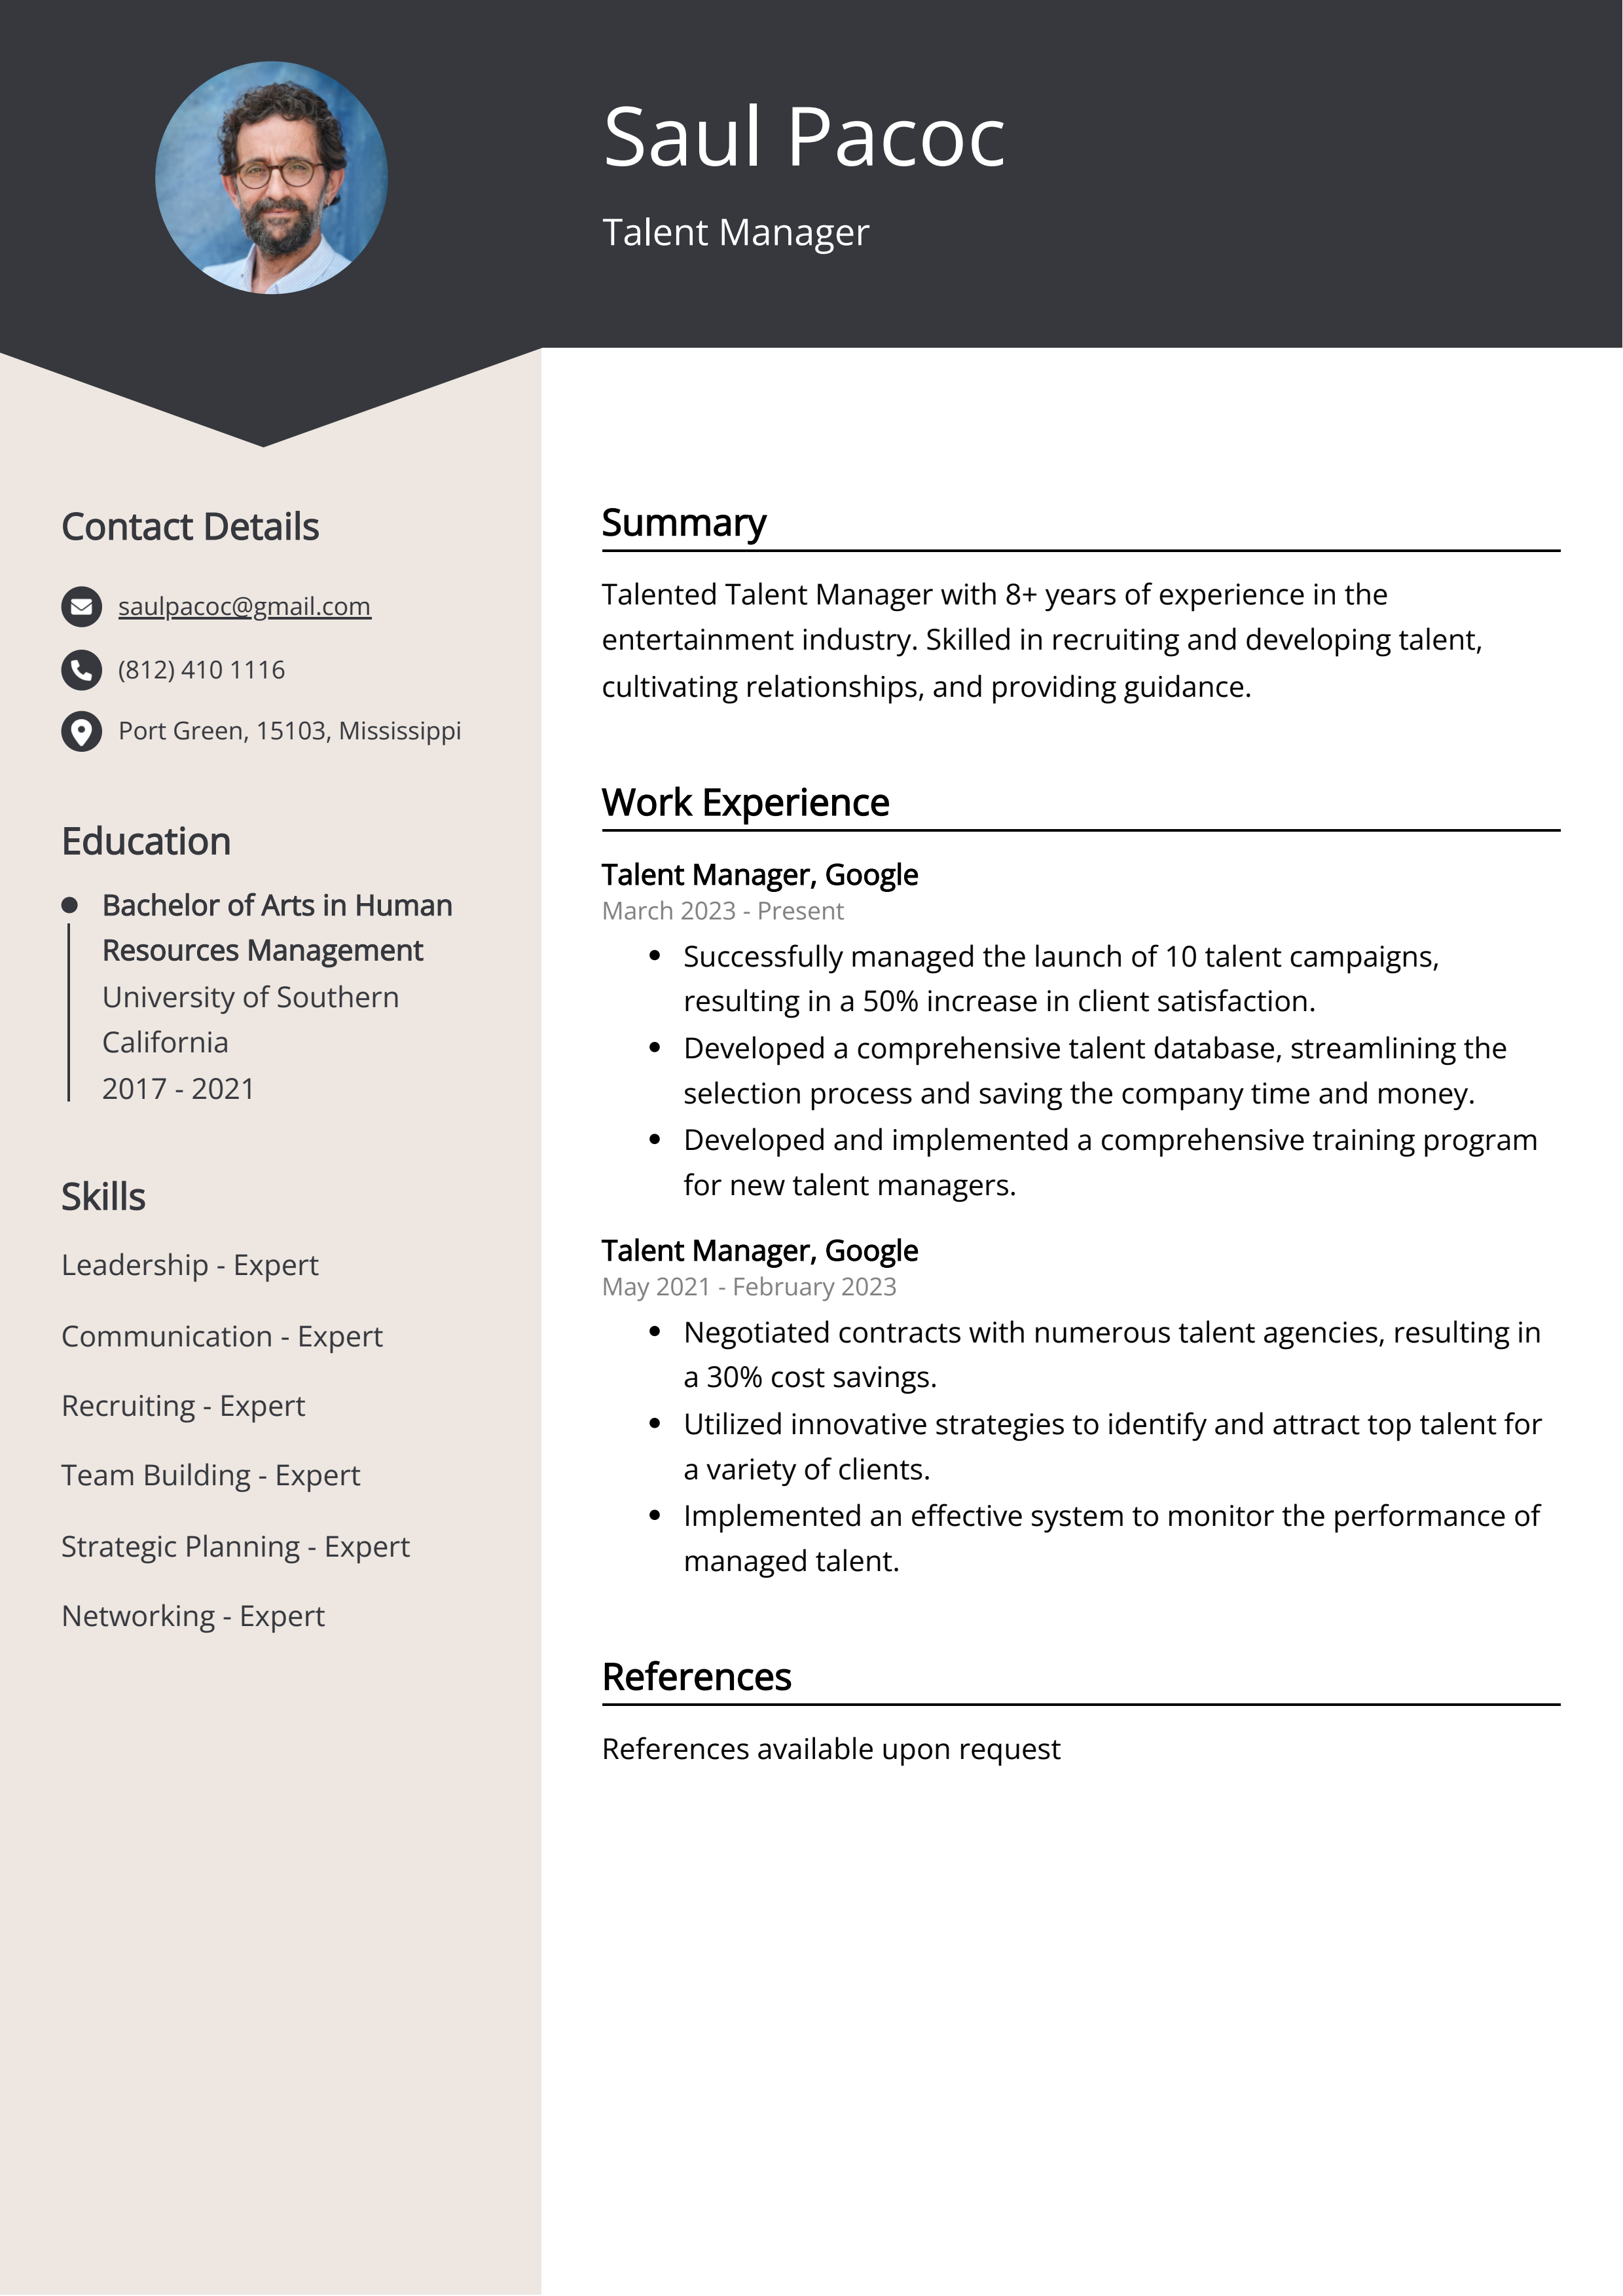 Talent Manager CV Example